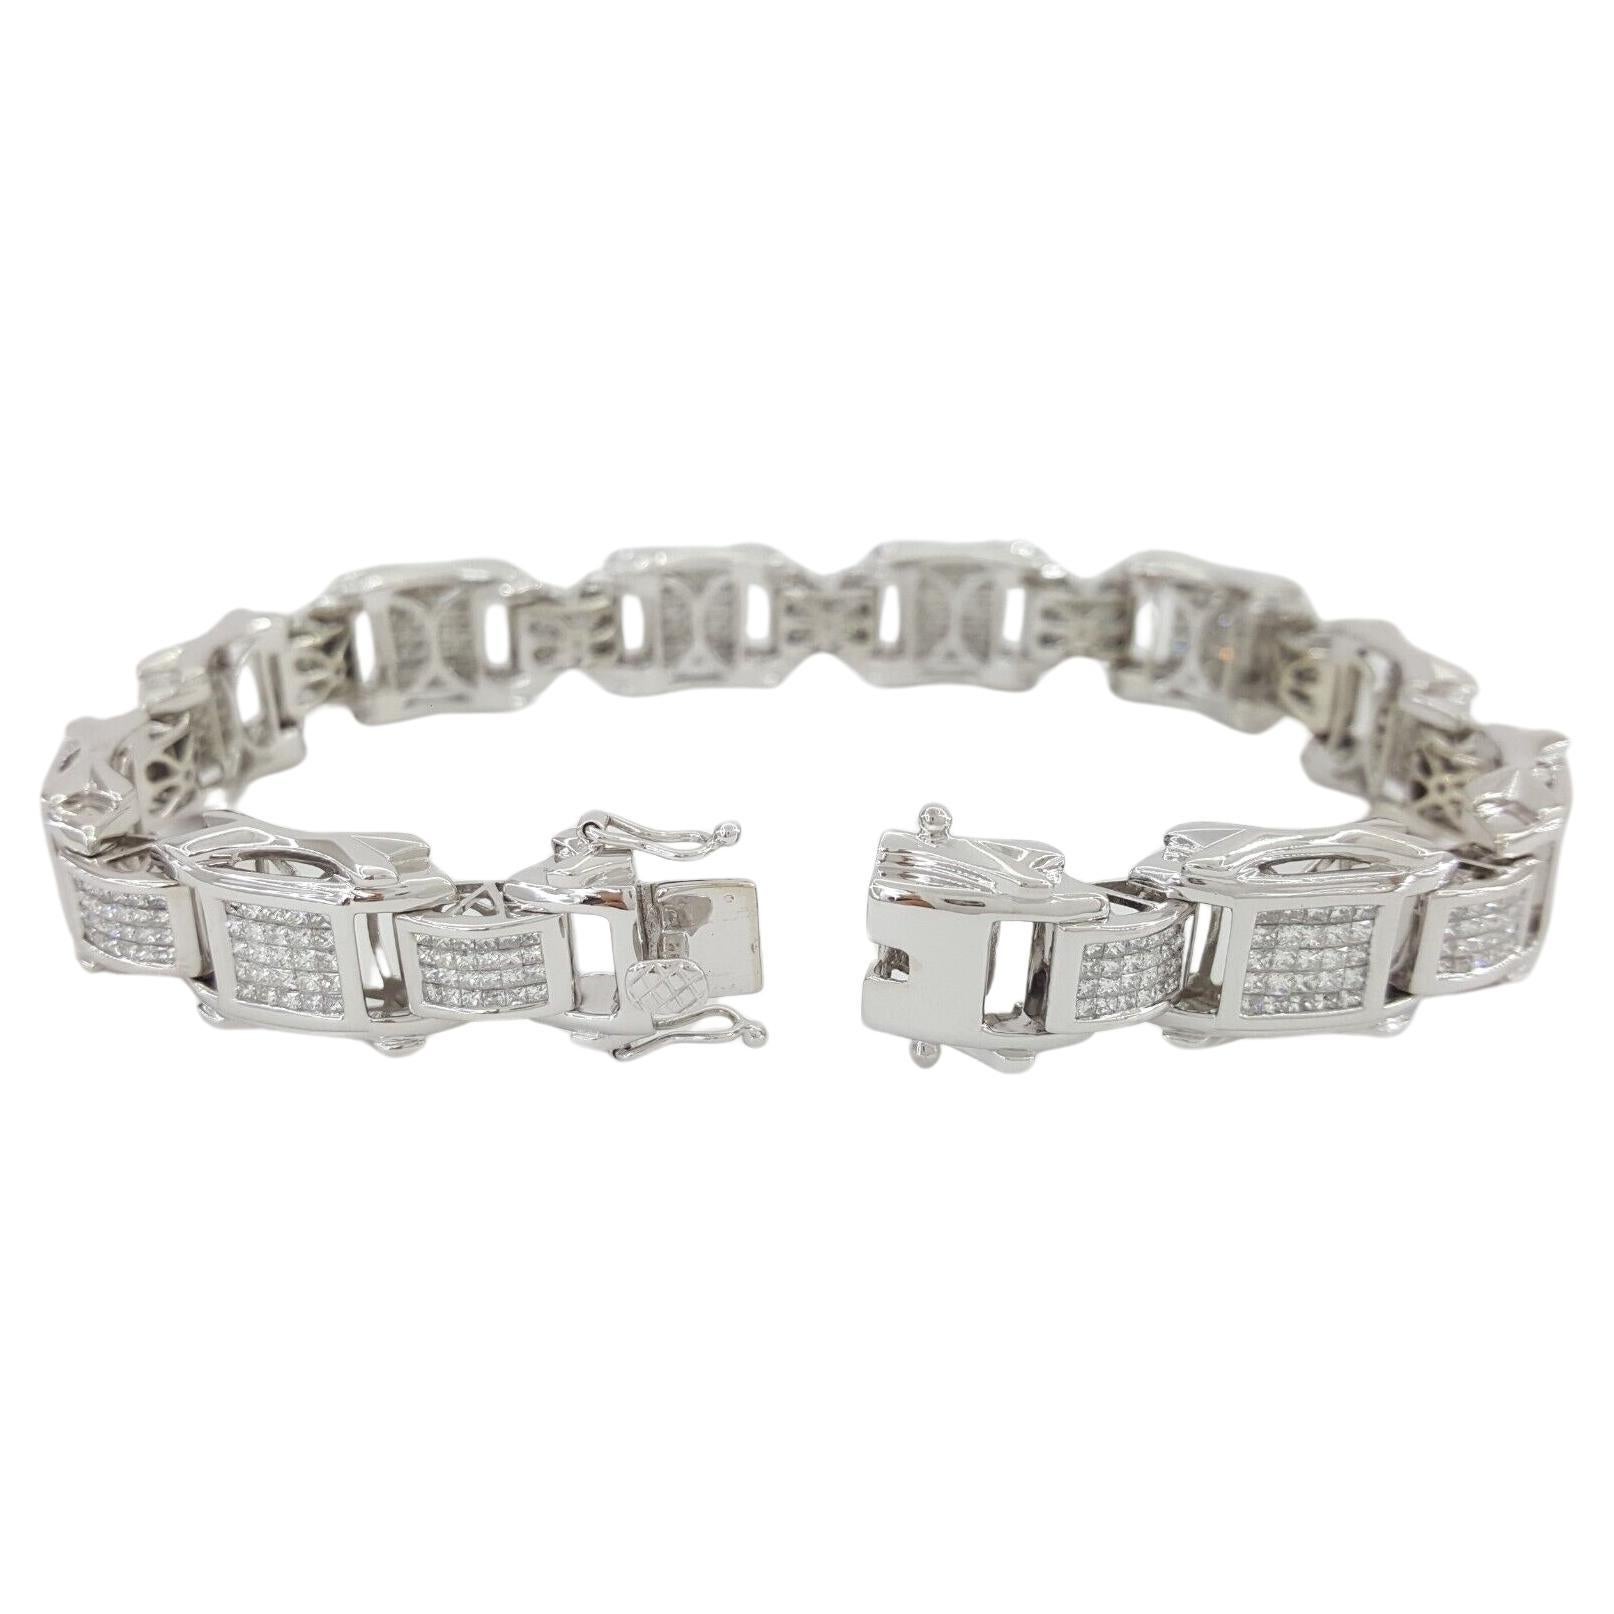 Elevate your style with the unparalleled luxury of this Men's Bracelet, a masterpiece in 14k White Gold adorned with a stunning total of 9 ct of Invisible Set Princess Cut Diamonds.

Key Features:

This remarkable bracelet boasts a substantial